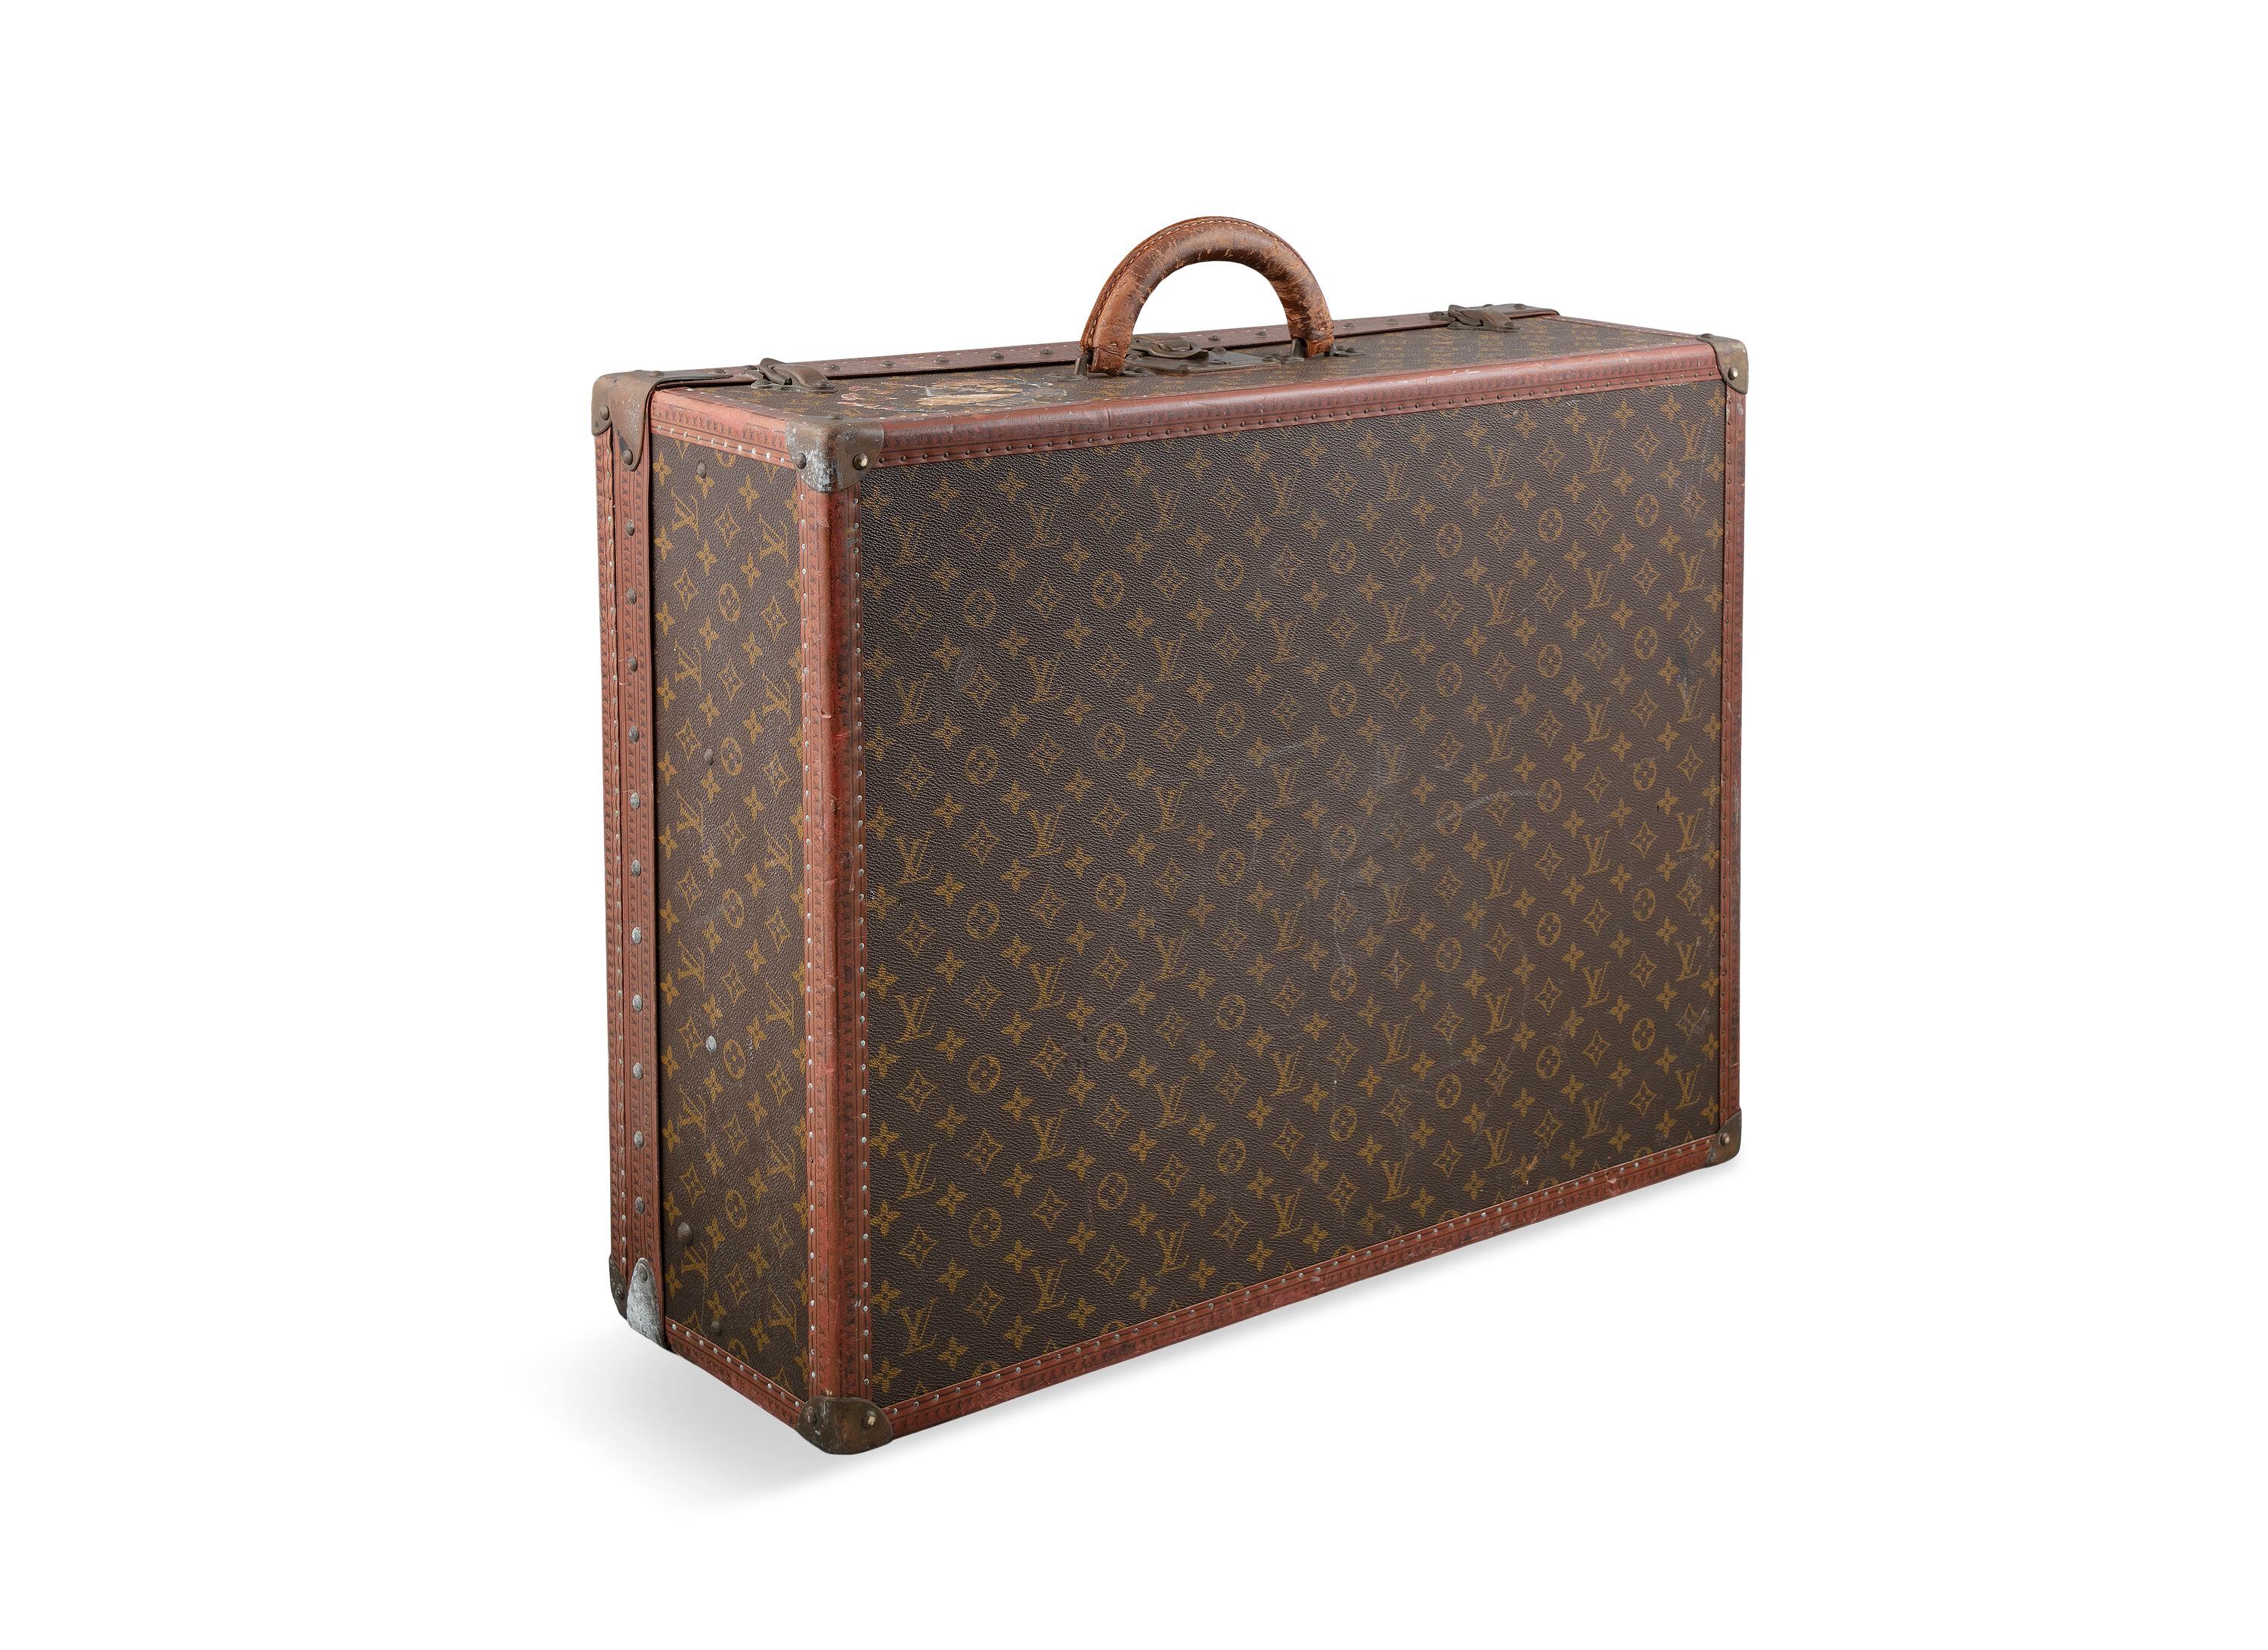 A Louis Vuitton shoe trunk – yours for just €50,000 – The Irish Times